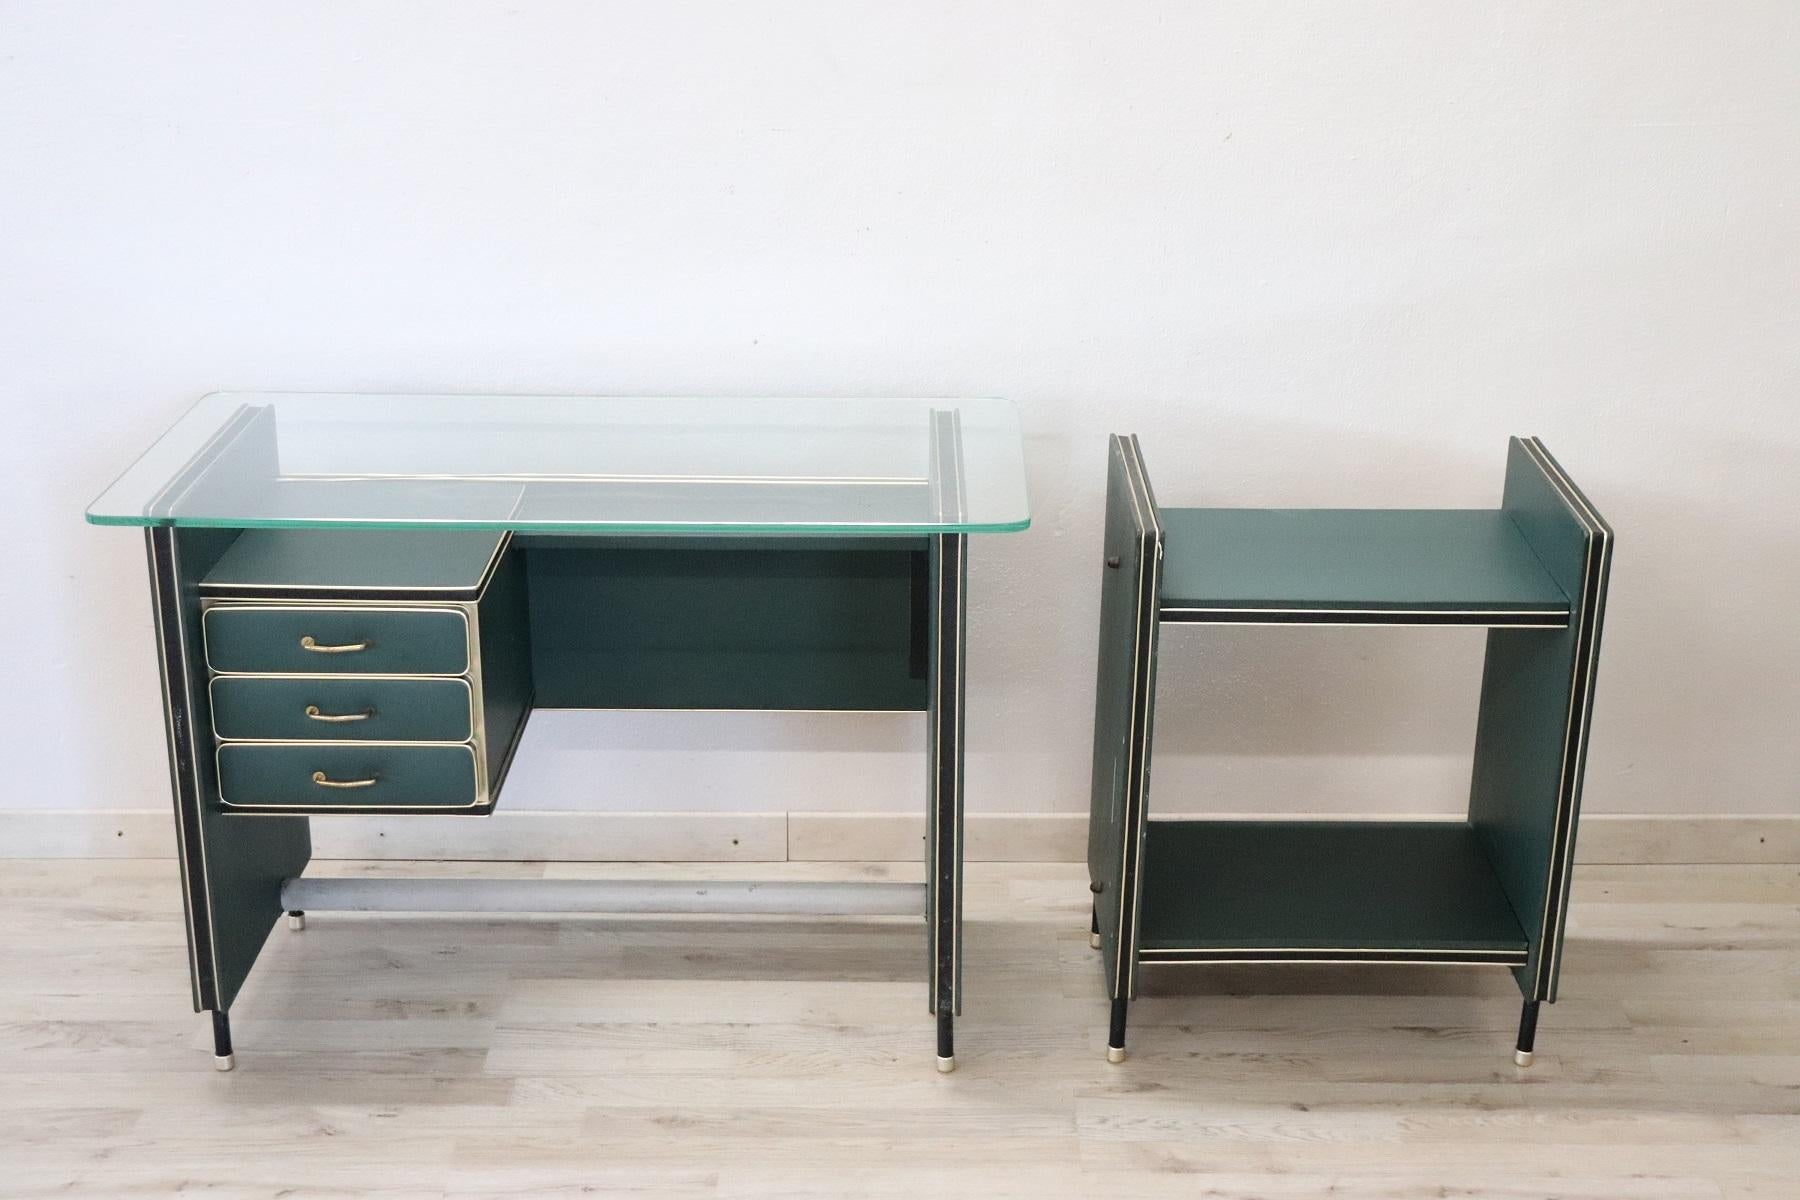 Refined and rare office furniture set Italian design 1950s by Umberto Mascagni in green faux leather. Top with original glass. 
This set consists of:
1 desk inch W 39,37 D 19,68 H 27,55 cm W 100 D 50 H 70
1 printer holder inch W 20,07 D 14,17 H